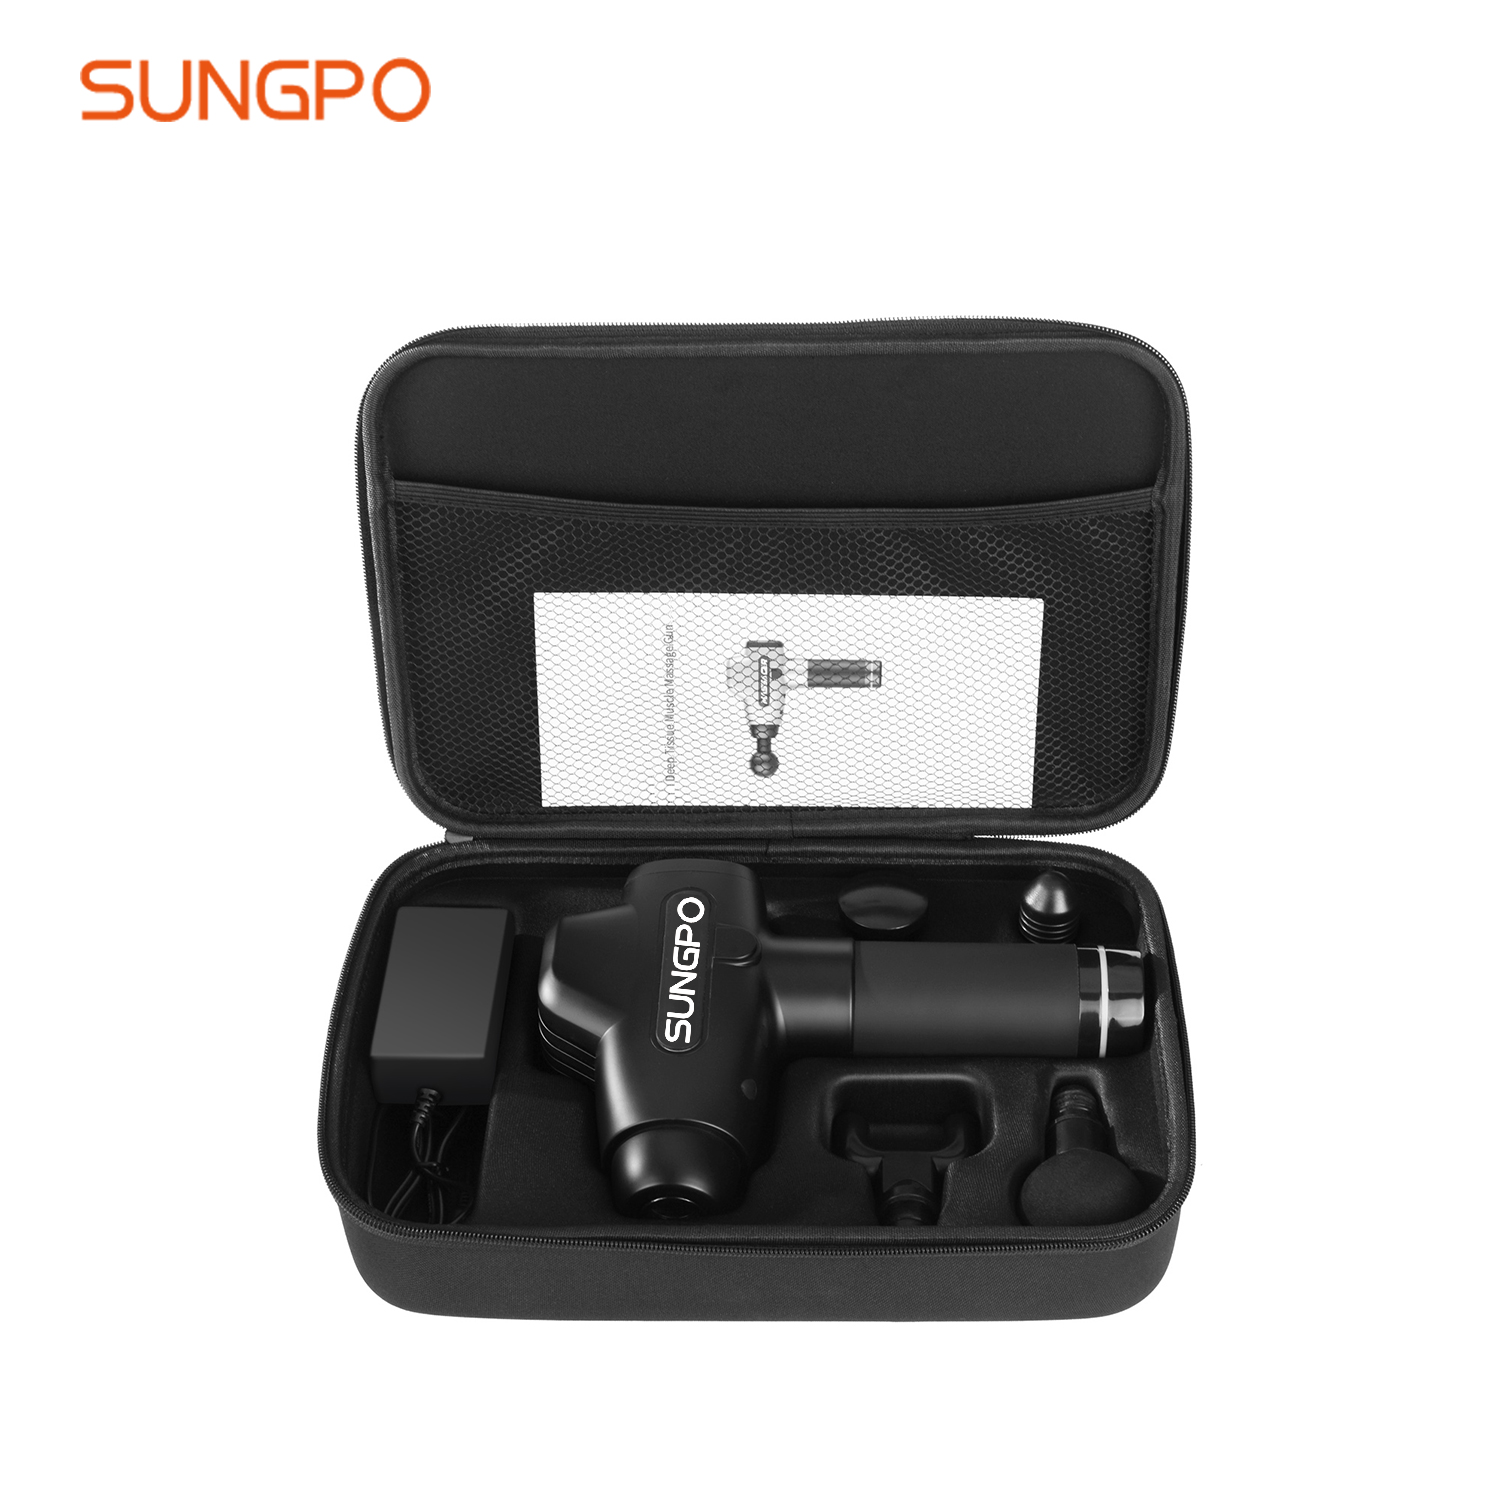 SUNGPO muscle massage machine factory direct supply for sports rehabilitation-1